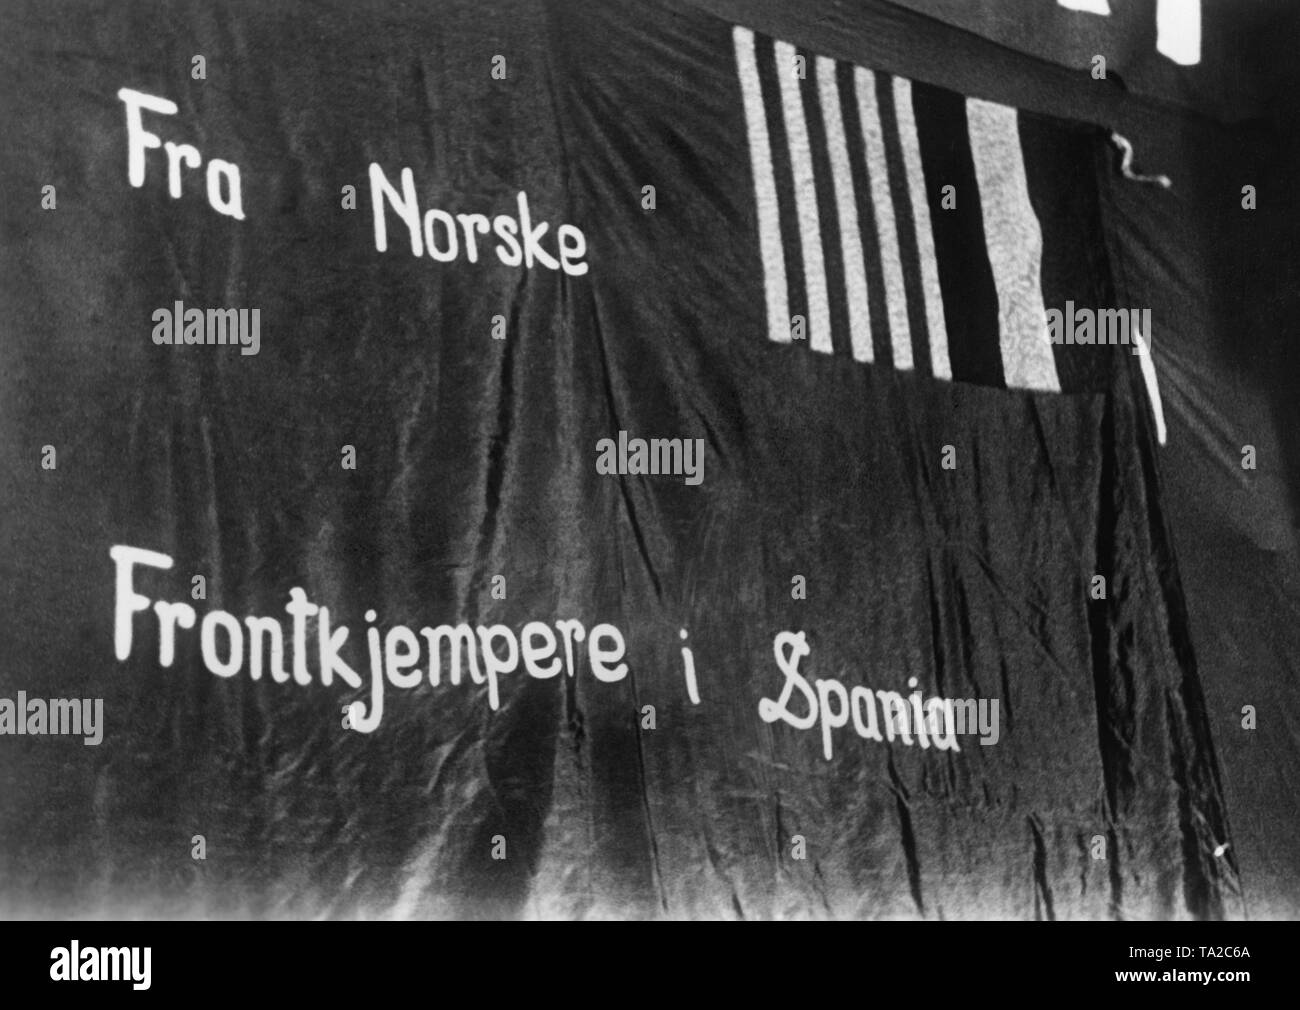 Photo of a flag of Norwegian volunteers of the International Brigades in the Spanish Civil War, 1937-1939. The banner says: 'As a front fighter in Spain from Norway'. Stock Photo